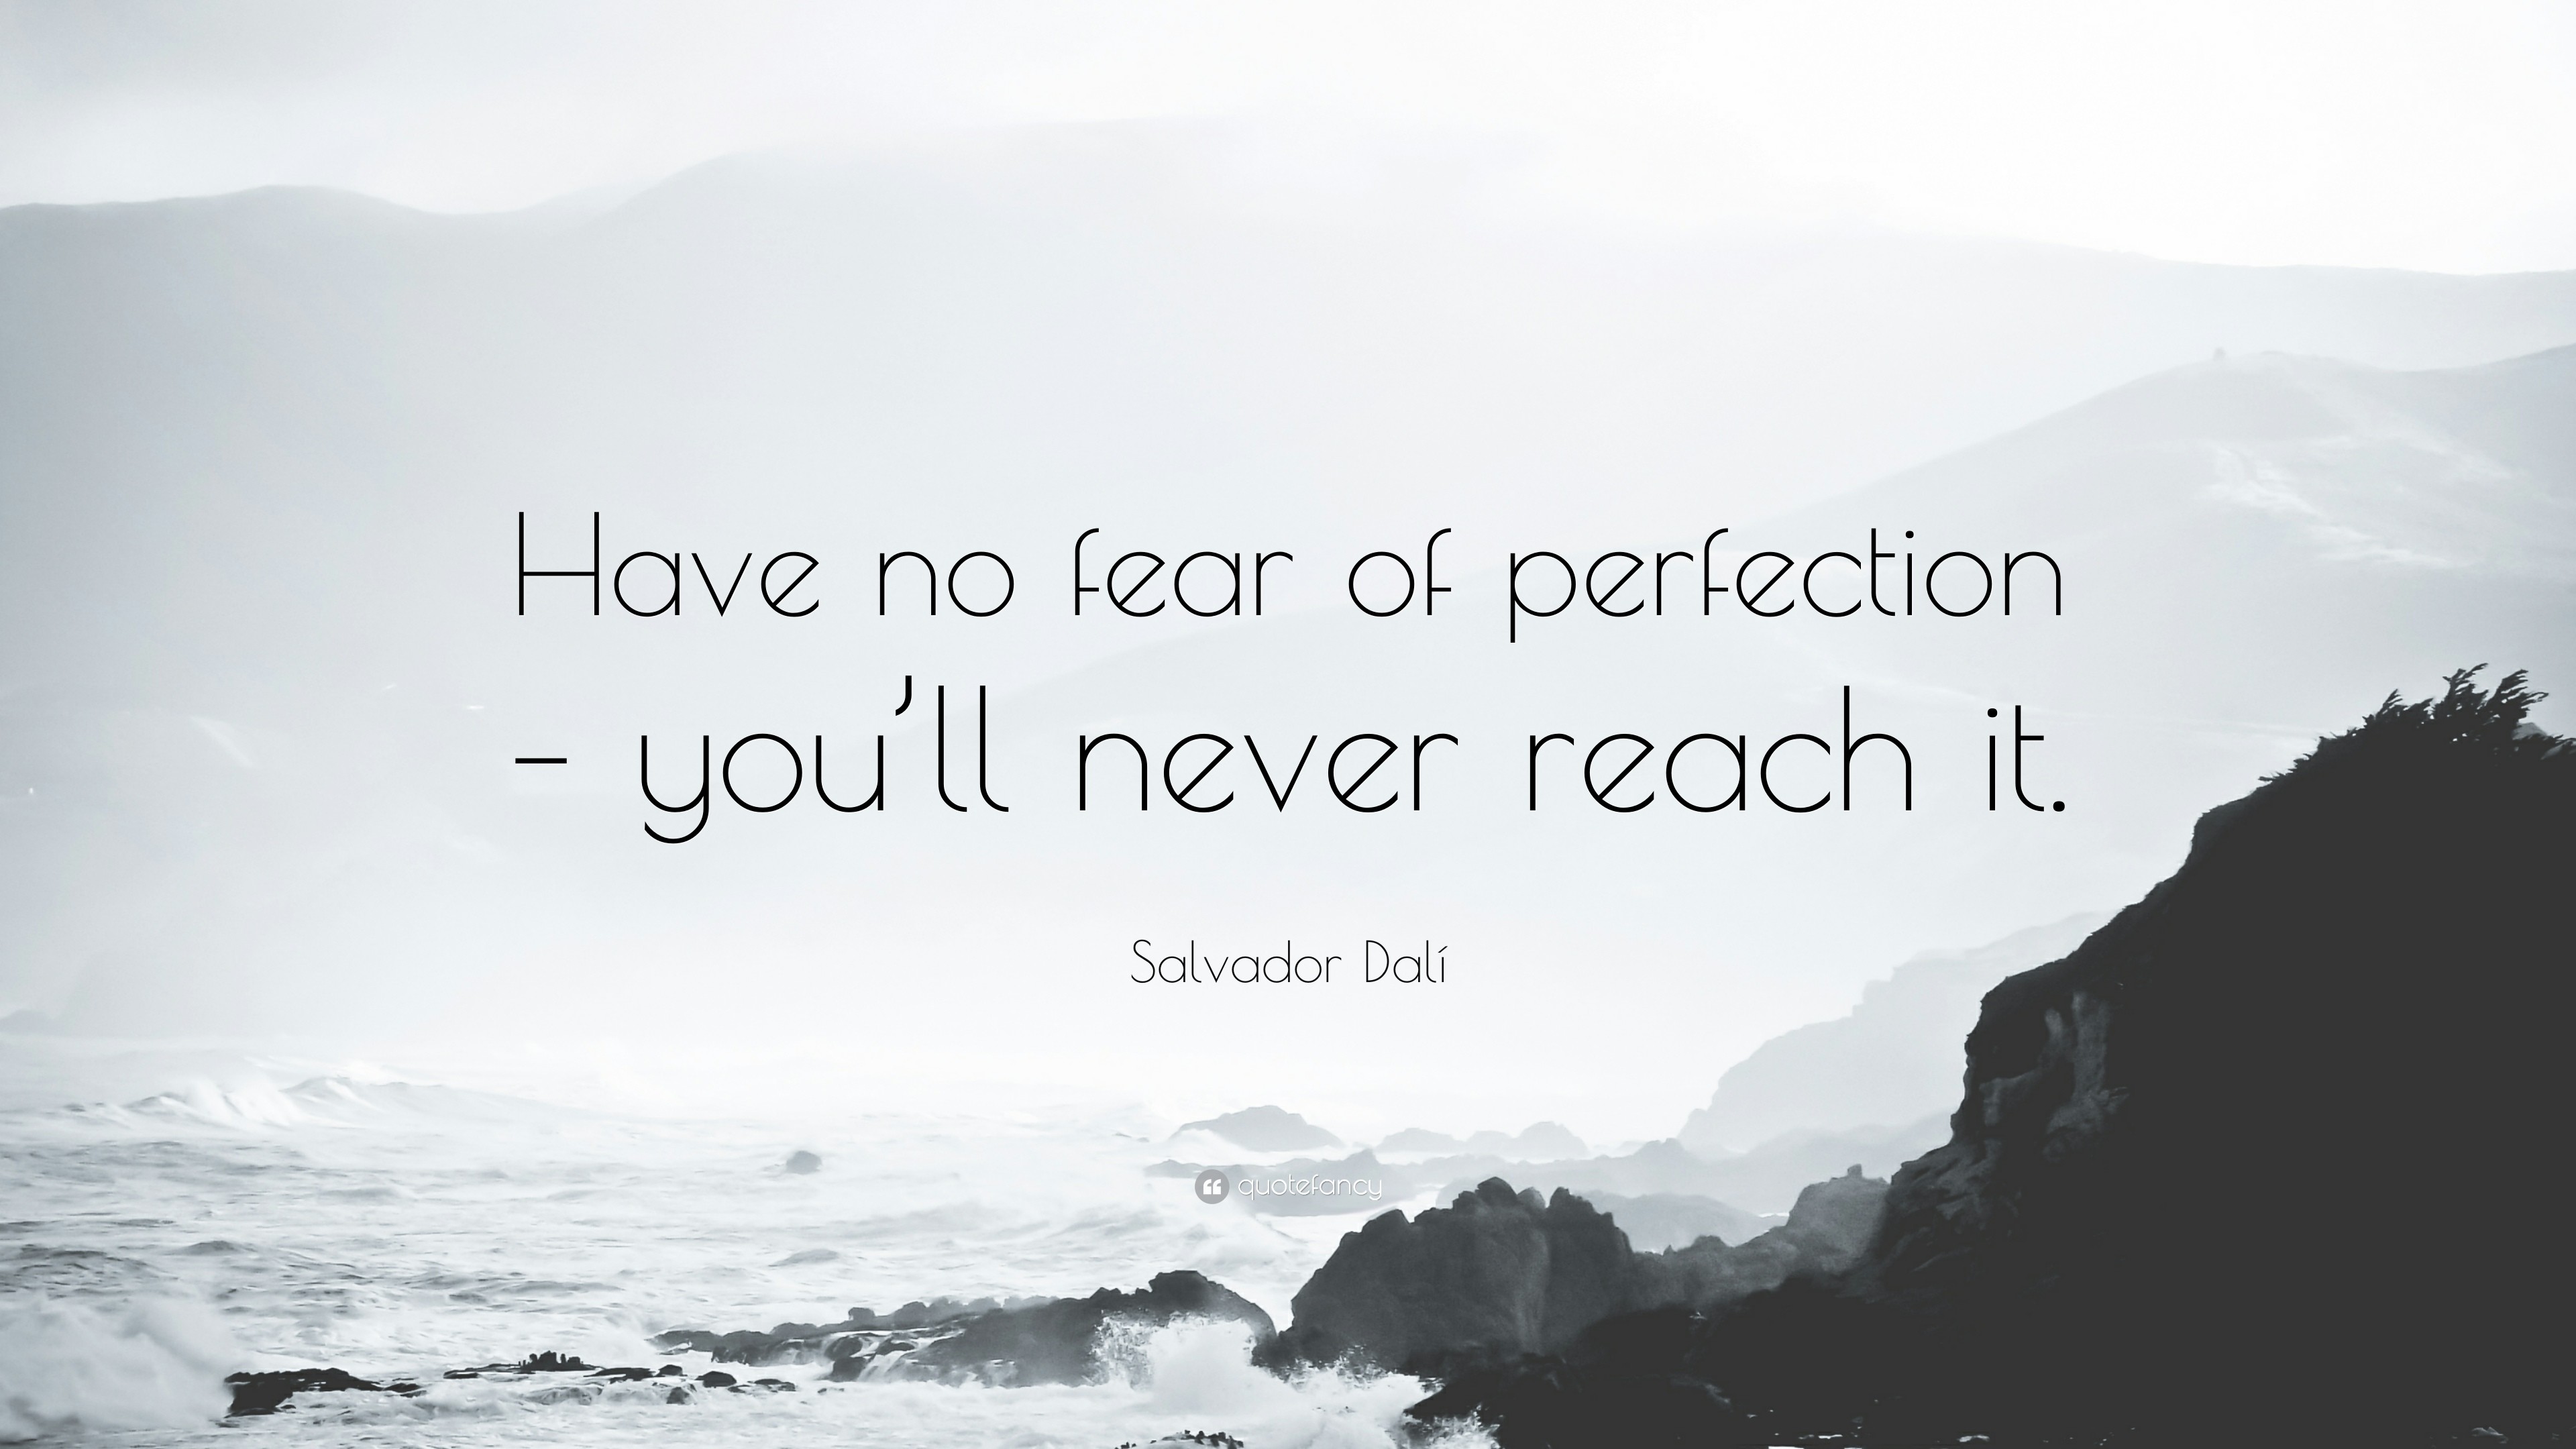 3840x2160 Salvador DalÃ­ Quote: “Have no fear of perfection – you'll never reach